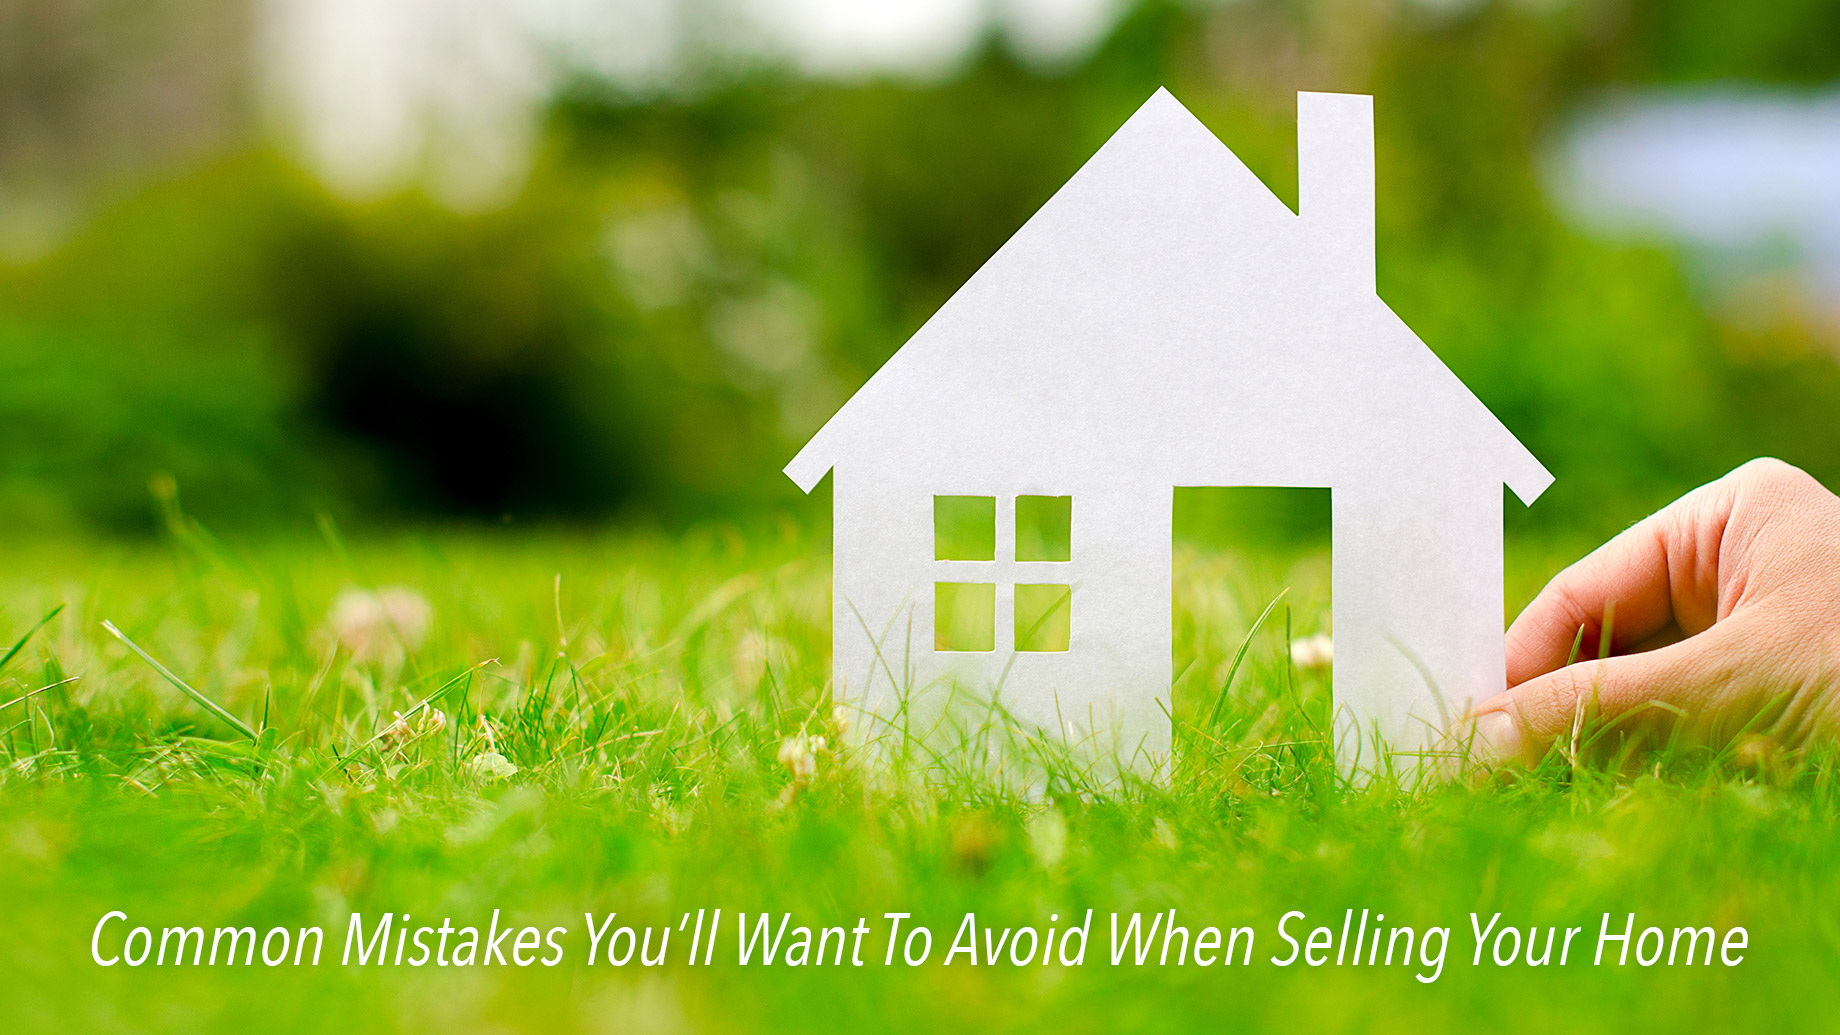 Common Mistakes You’ll Want To Avoid When Selling Your Home